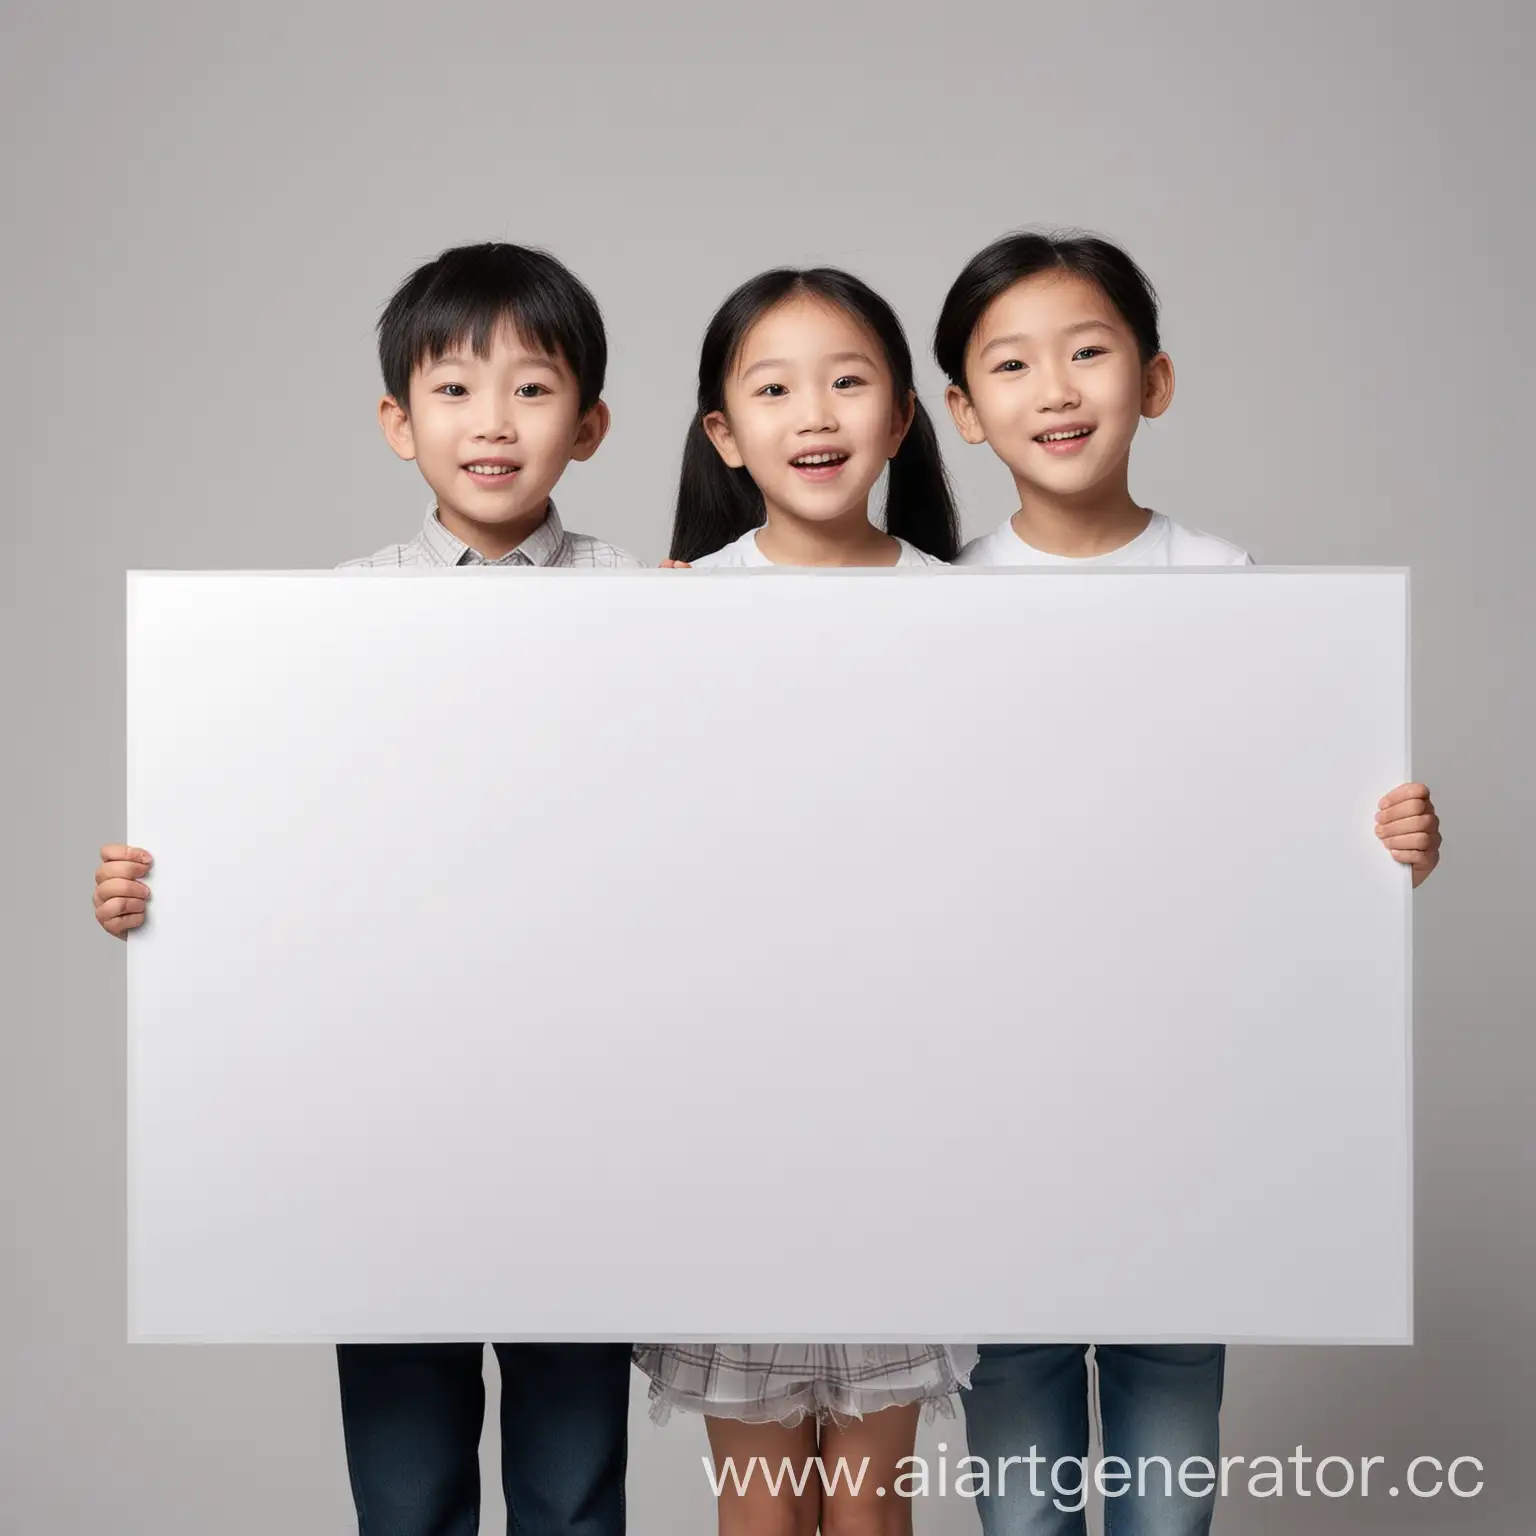 Asian-Boy-and-Girl-Holding-Blank-White-Poster